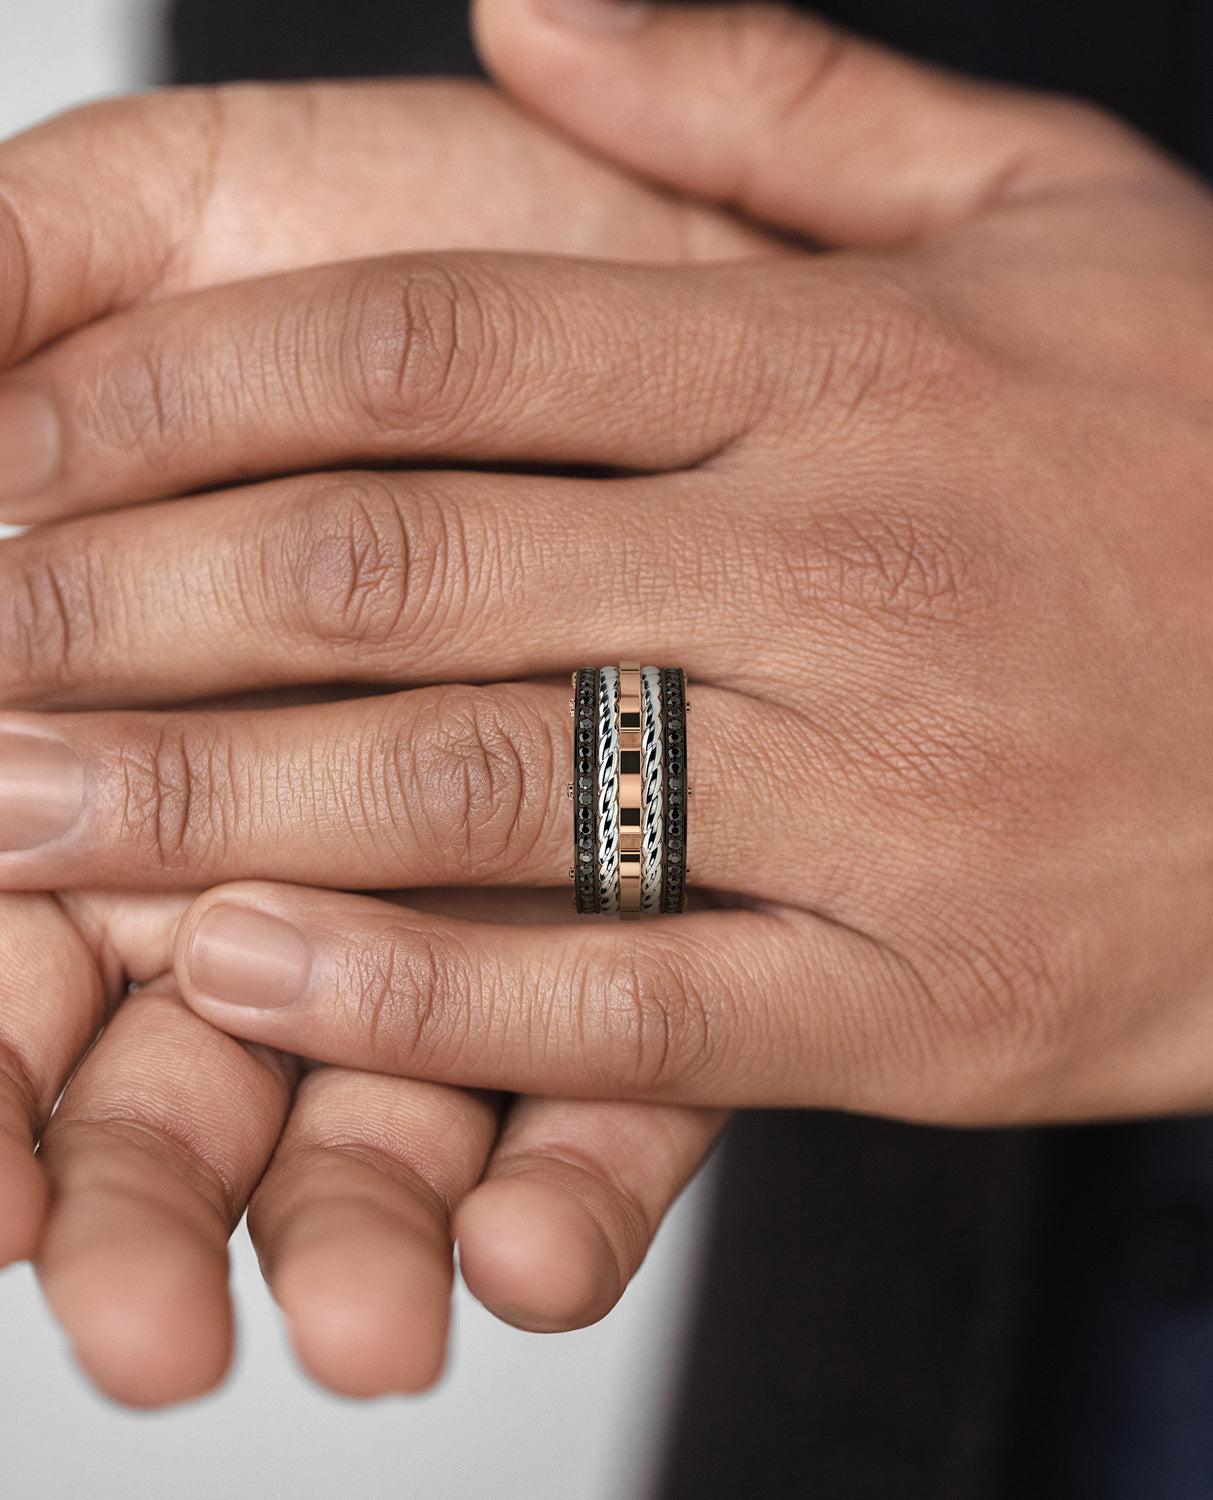 Three bold-looking two-tone rings, pave set with 1.05ct brilliant cut round black diamonds, connected by the signature exclusive Rockford screws with rope designs flowing in between the bands. Our ROPES ring has a very modern, striking look with a